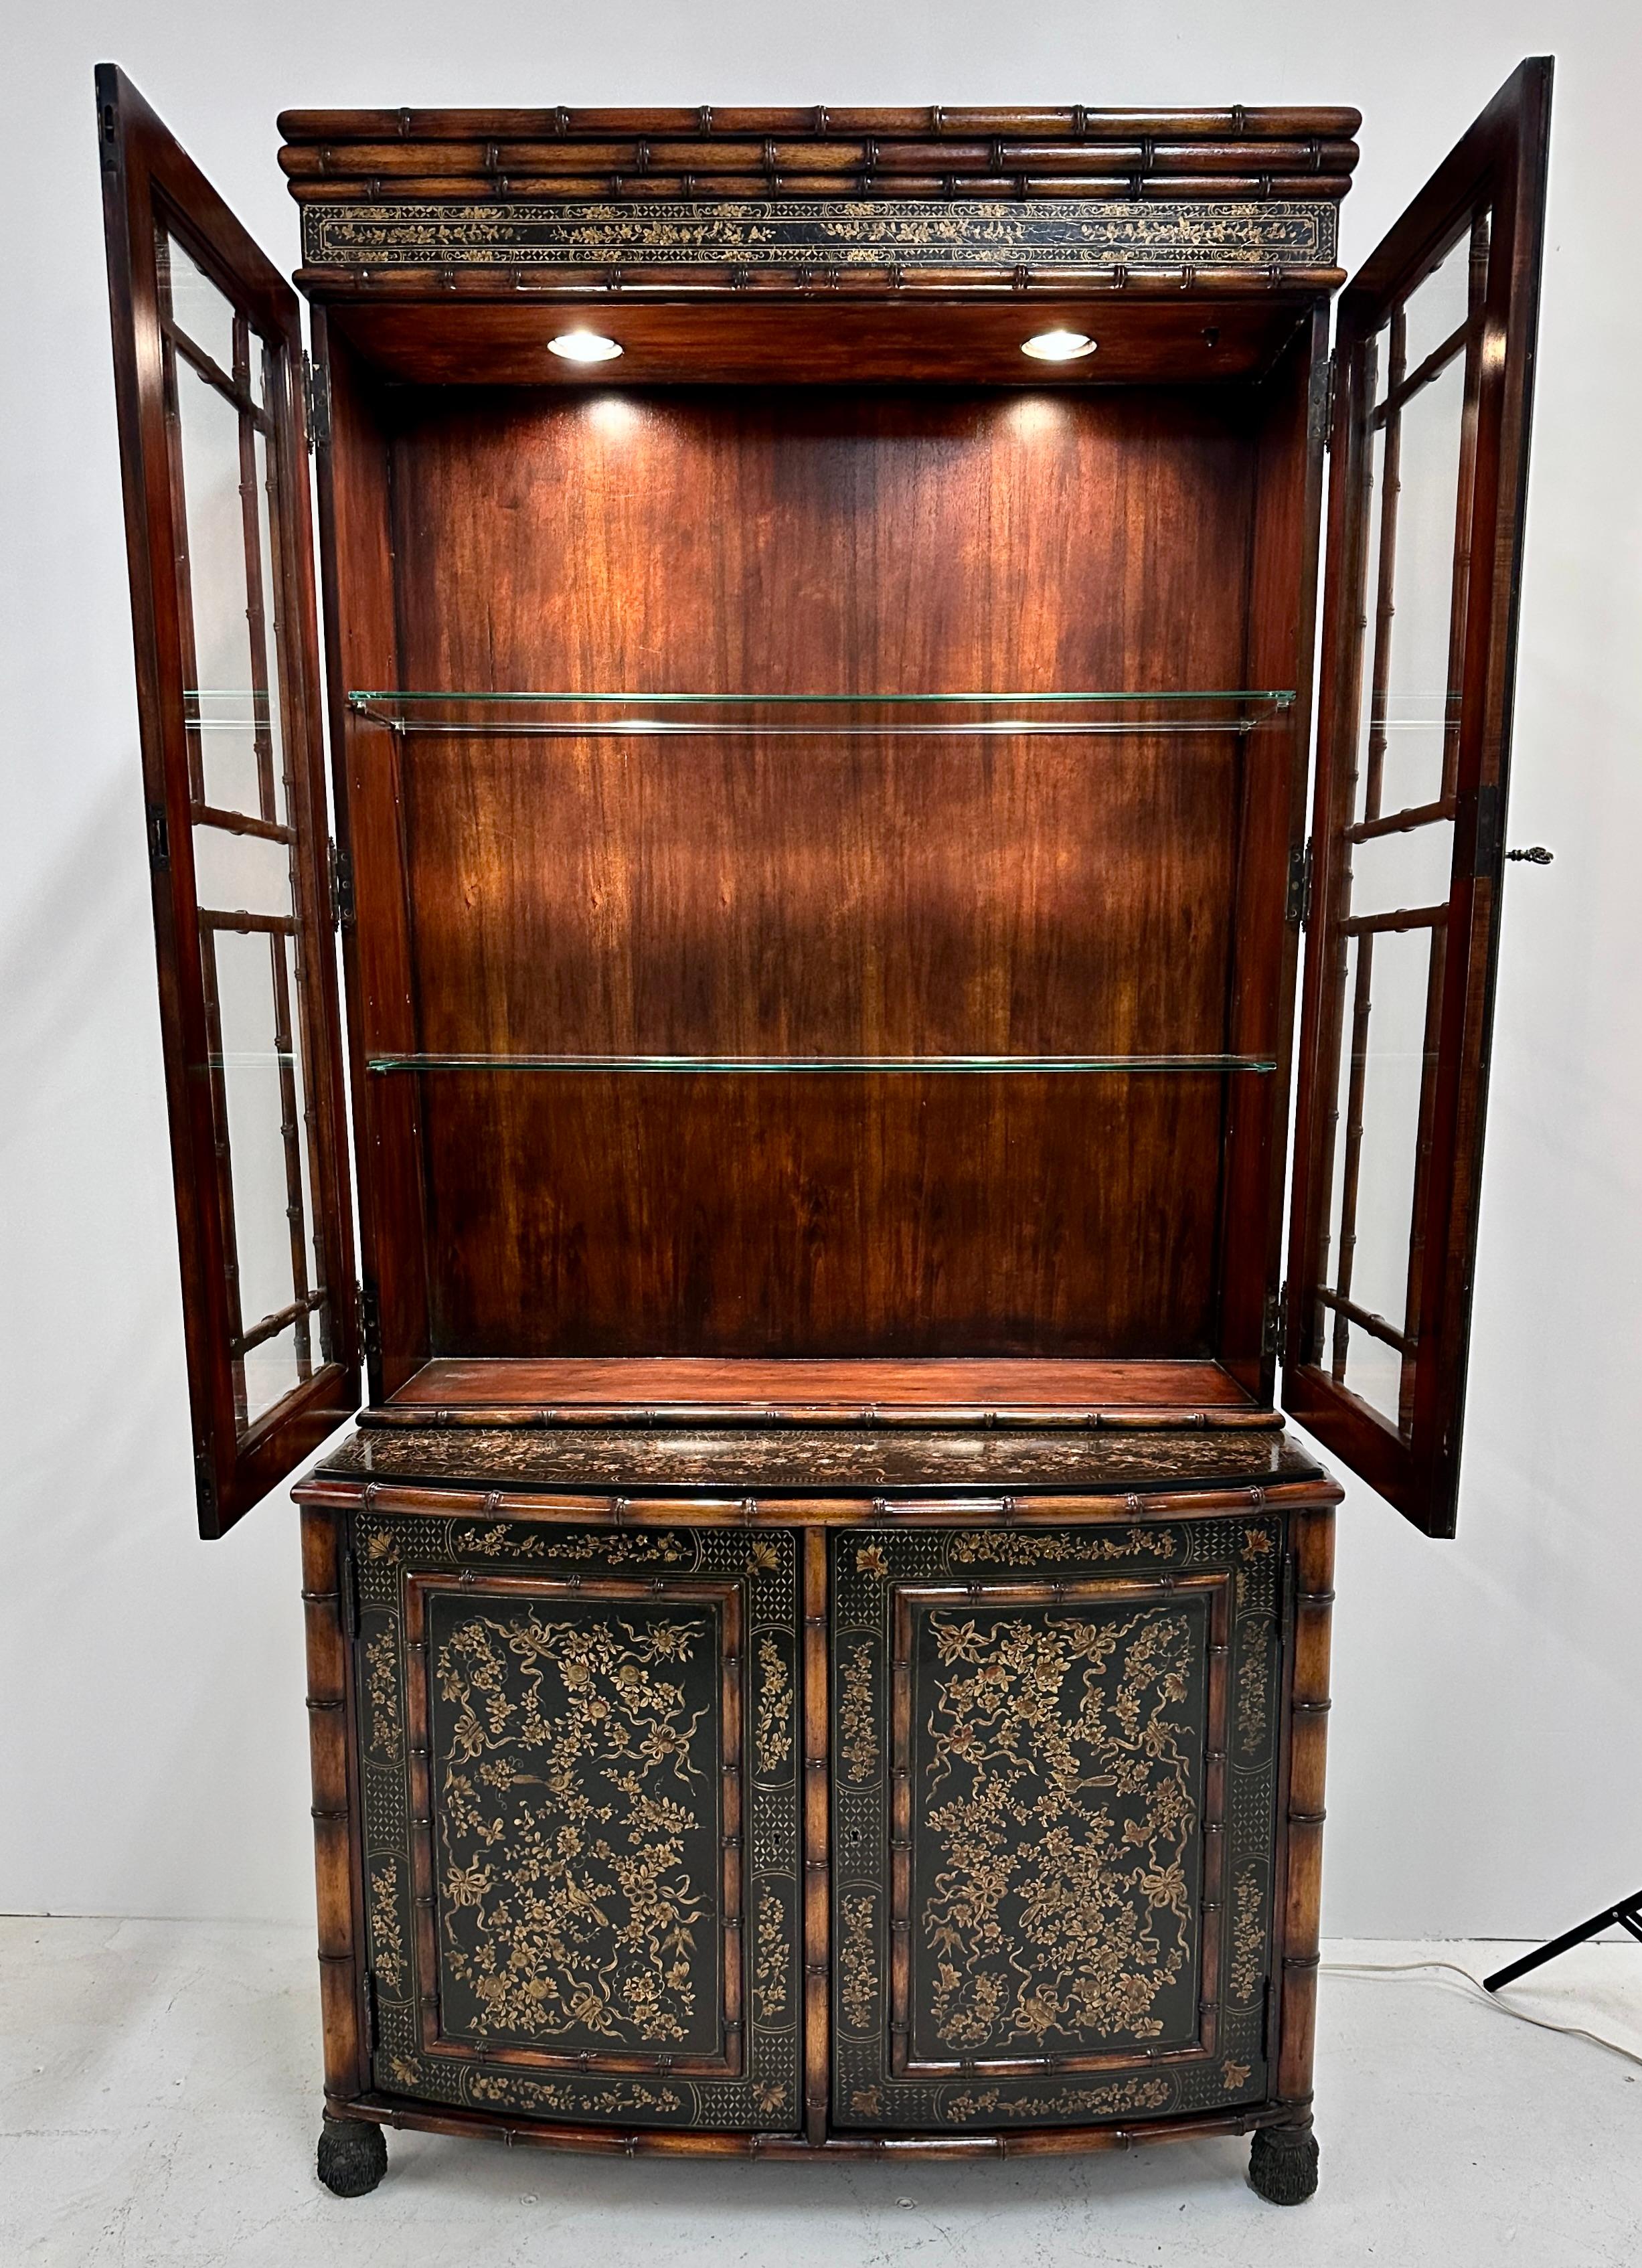 A lovely cabinet with hand painted decoration in gold over a very dark green, detailed with faux bamboo trimming. The upper section behind mullioned glass doors has glass shelves and integrated down lights. The lower cabinet features a single wood